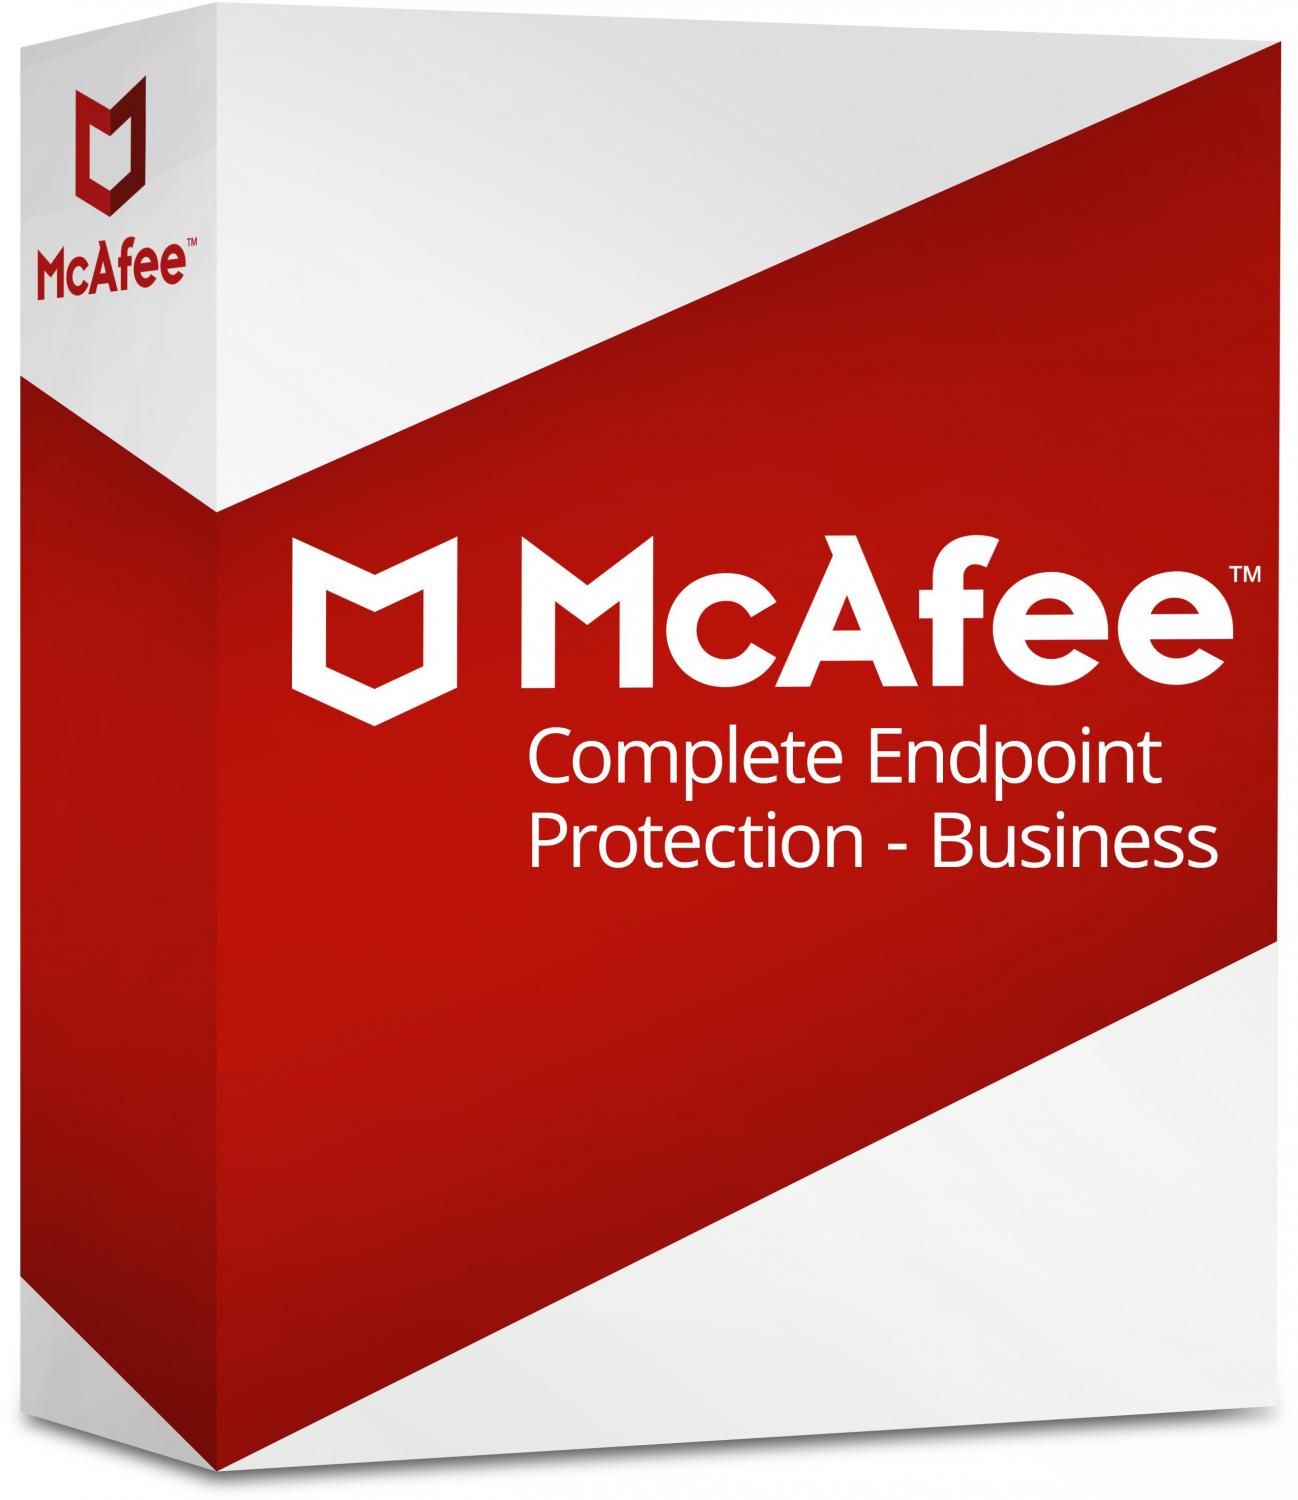 Complete EndPoint Protection - Business